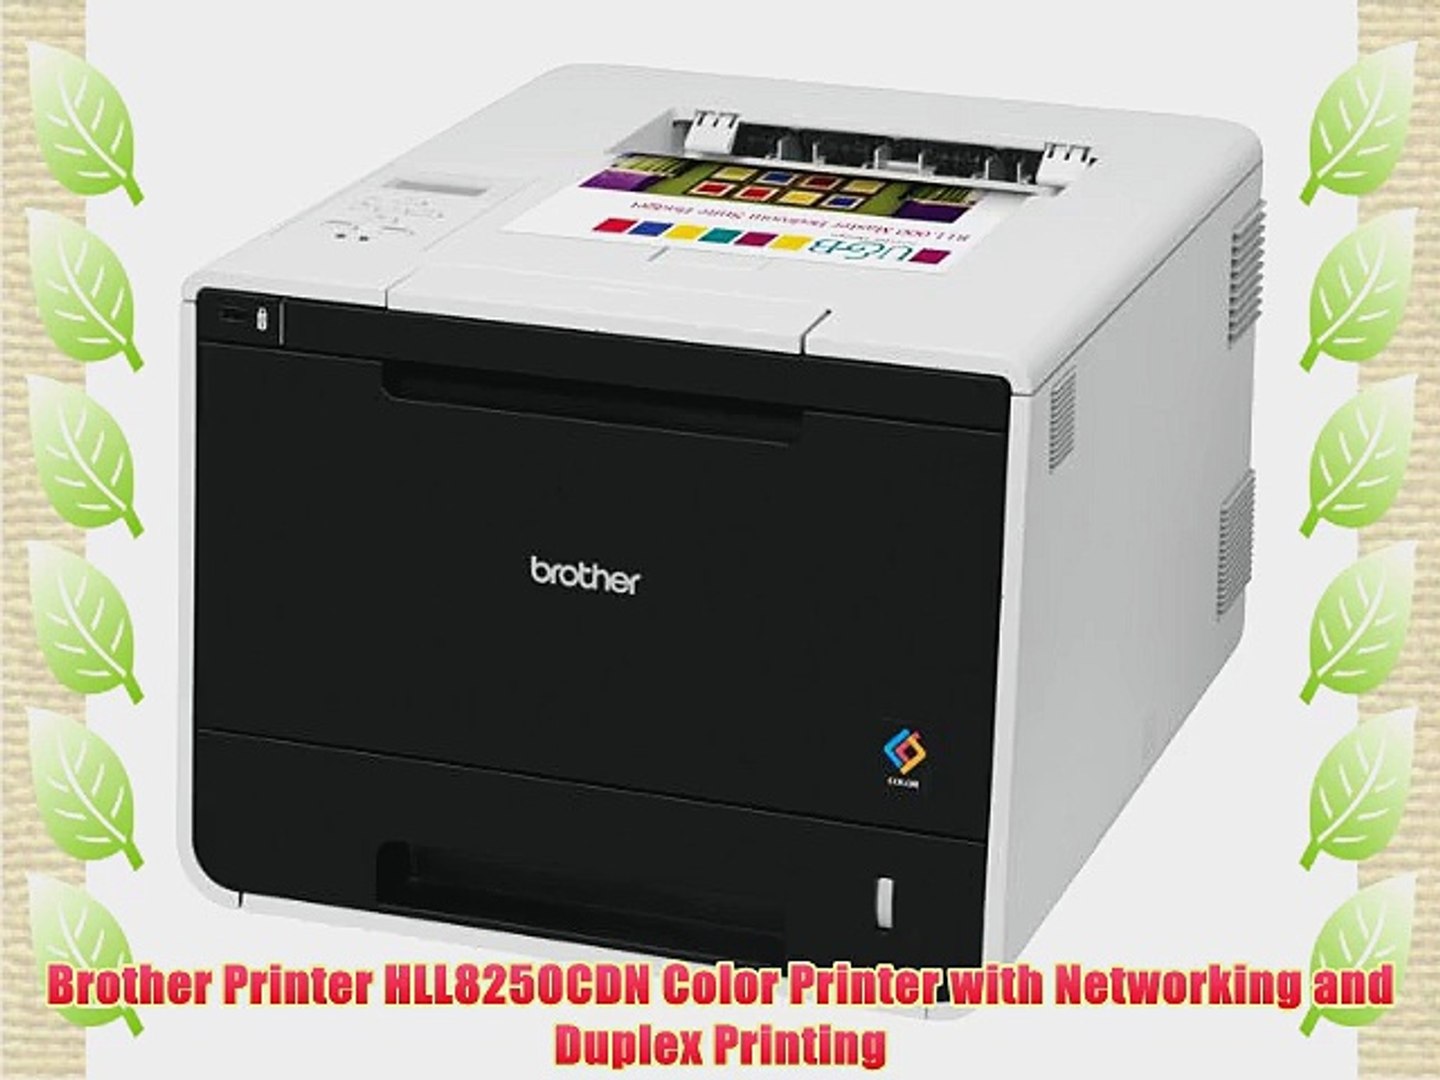 ⁣Brother Printer HLL8250CDN Color Printer with Networking and Duplex Printing